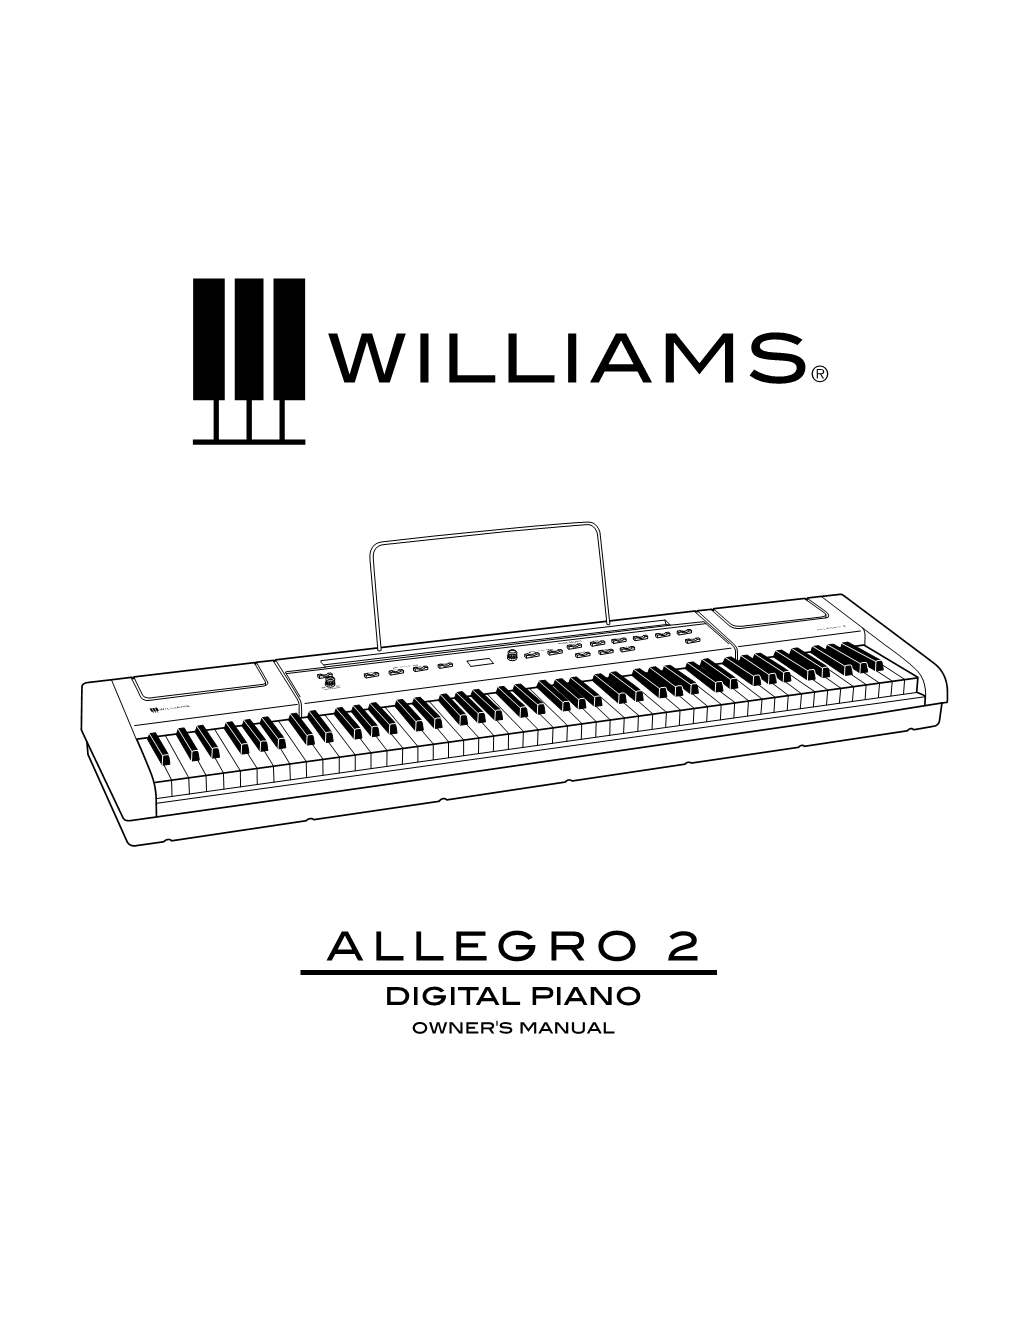 Williams Allegro 2 Digital Piano Will Provide Years of Musical Enjoyment If You Follow the Suggestions Listed Below